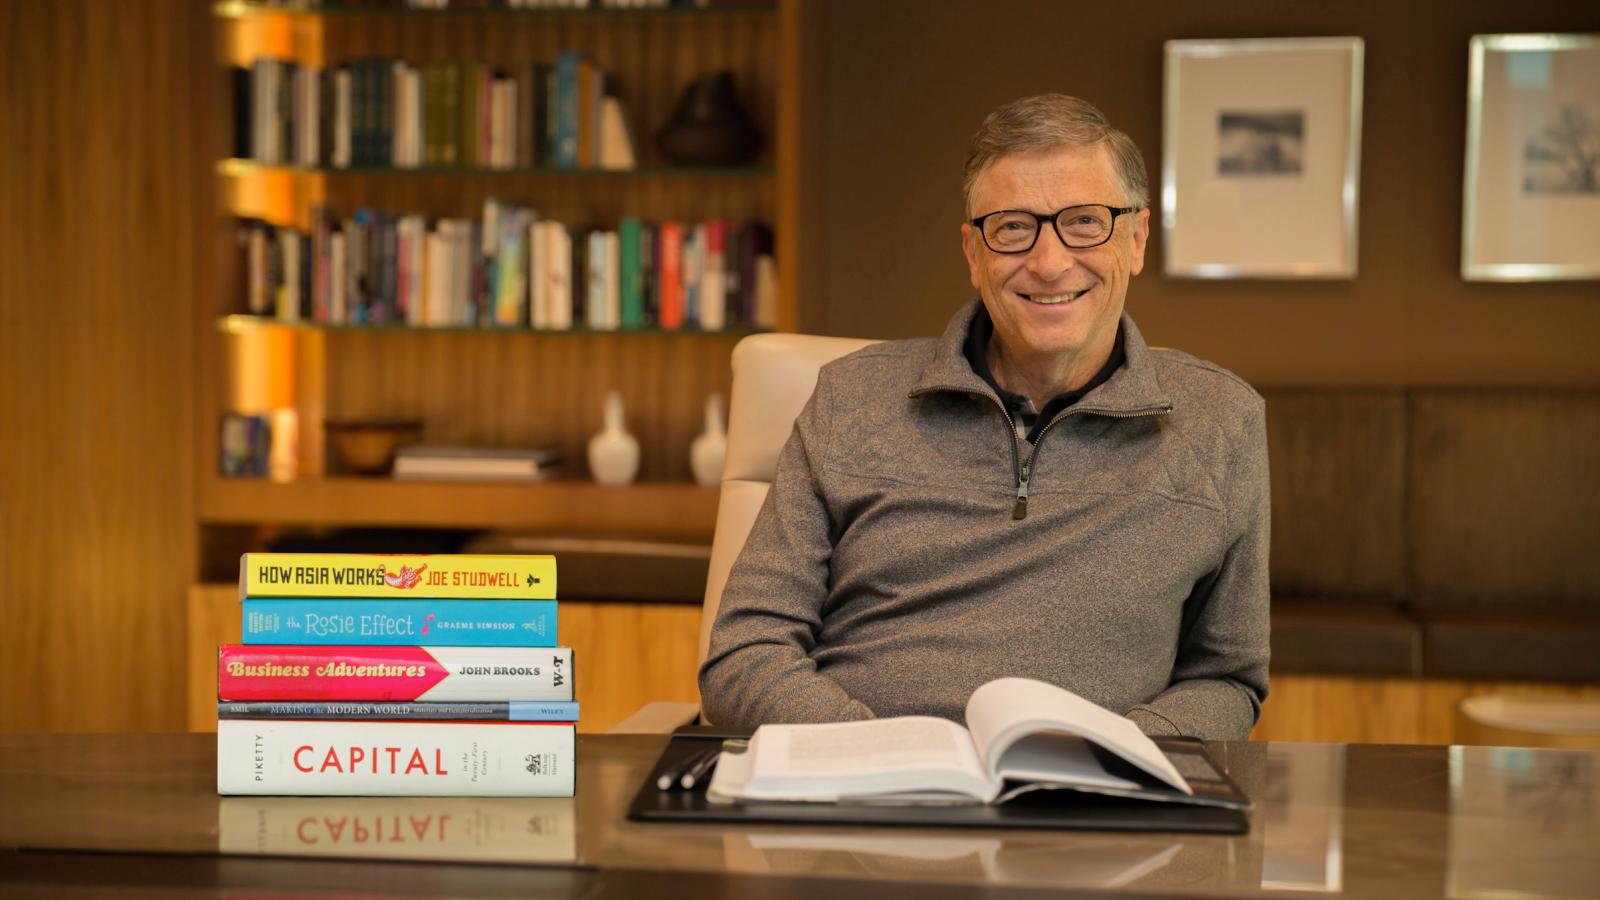 Bill Gates Book Recommendations: What Books Does He Read?